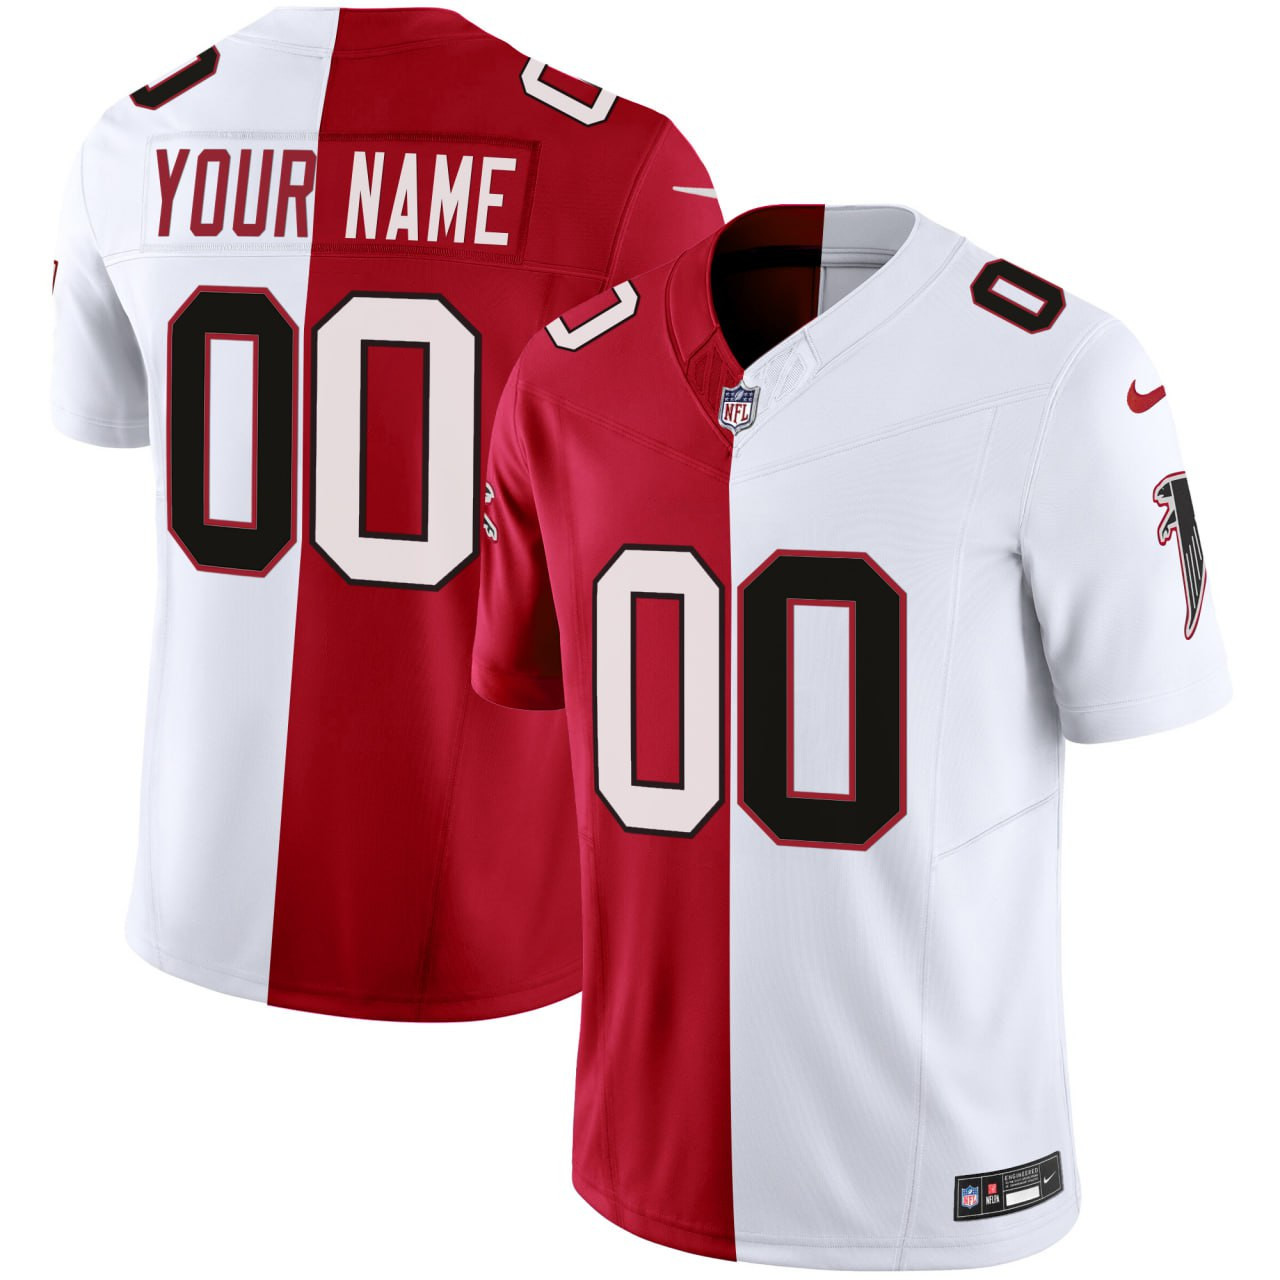 Atlanta Falcons Split Red White Custom Jersey - All Stitched